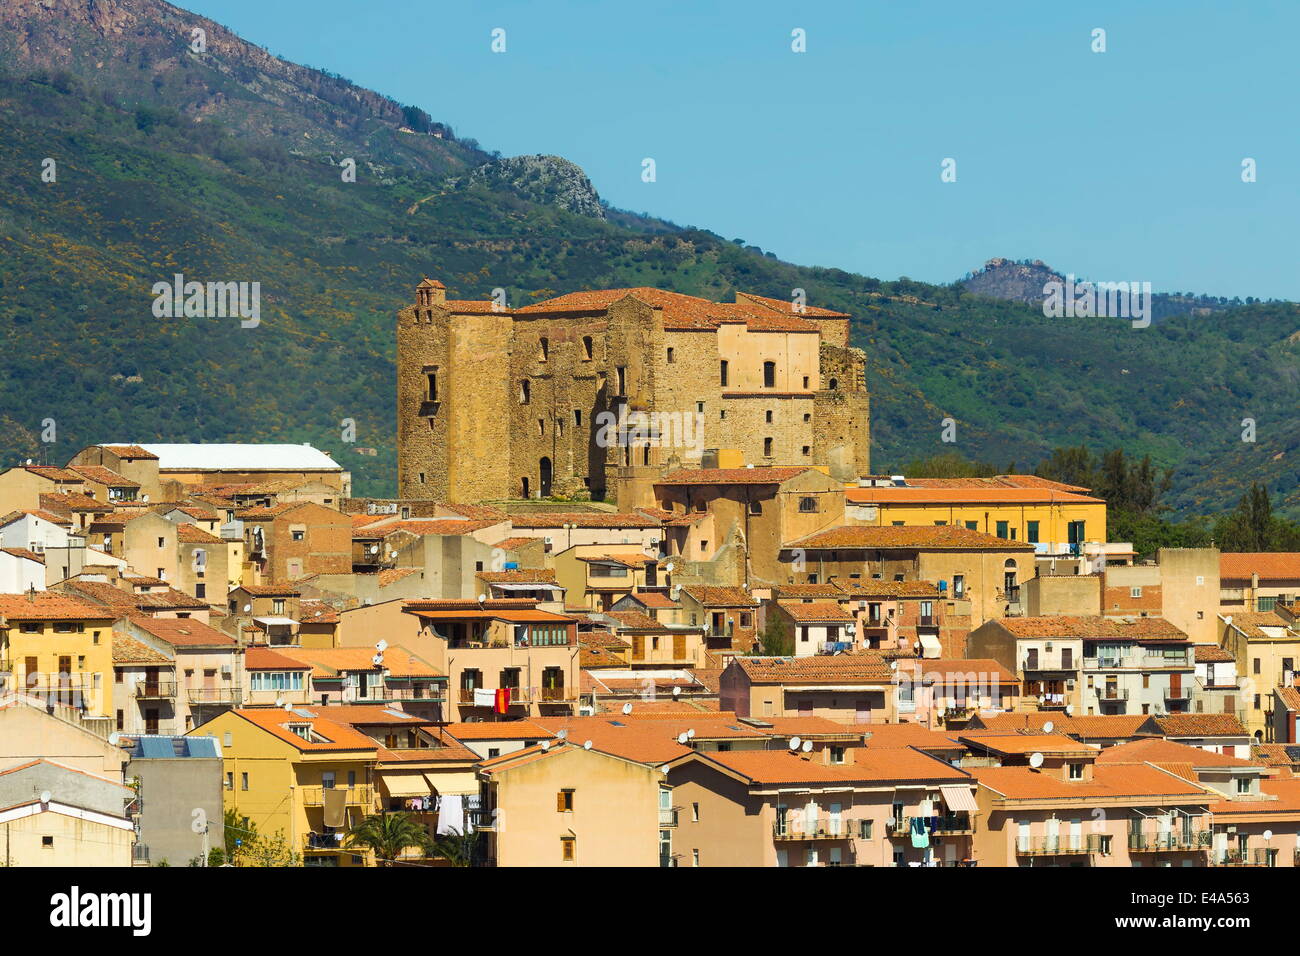 Arab-Norman castle that gives this town near Cefalu its name of Good Castle (Castelbuono), Palermo Province, Sicily, Italy Stock Photo